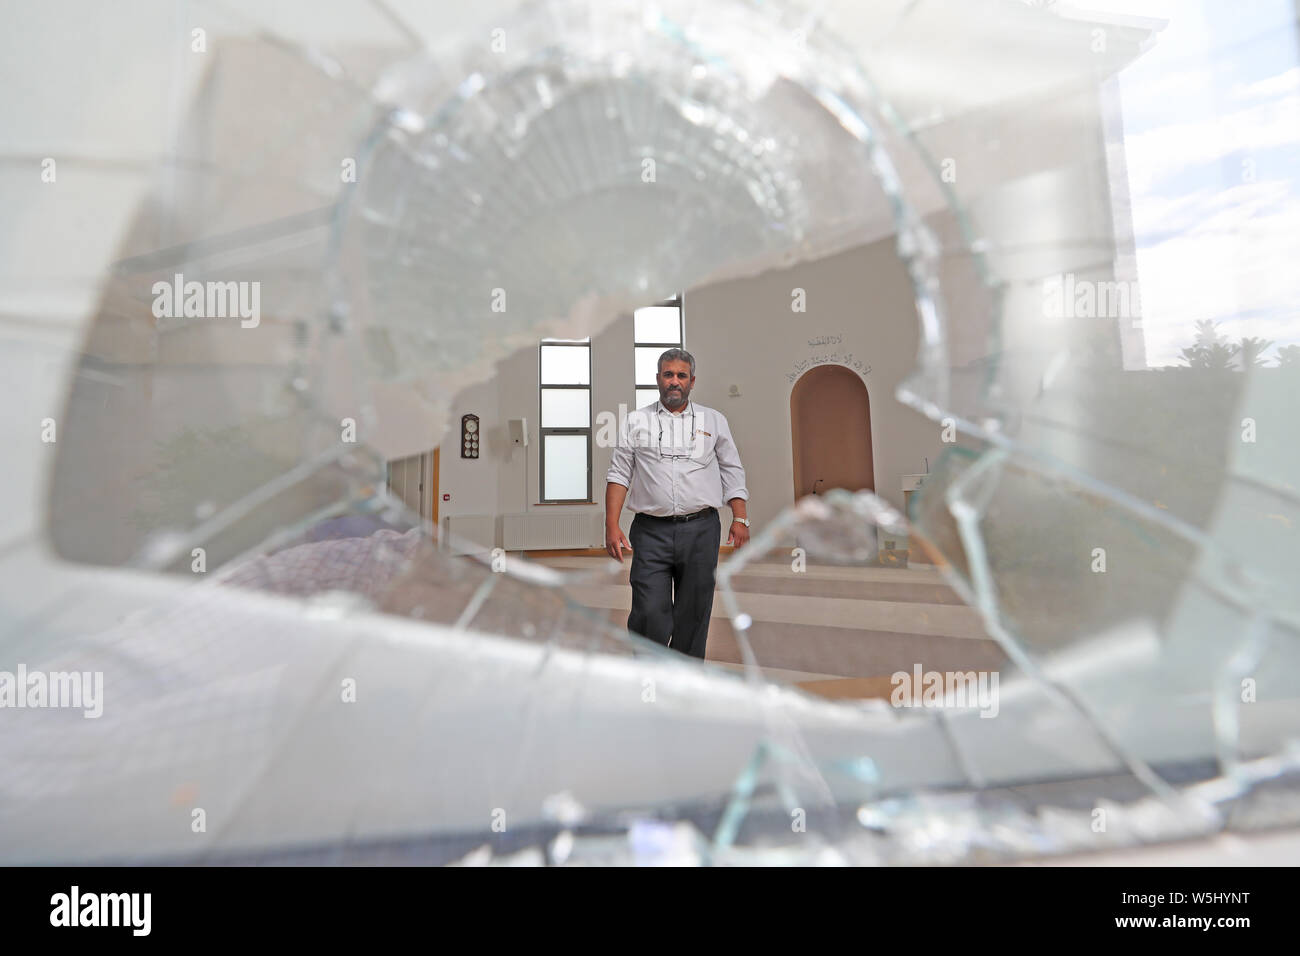 Shareef Mubashir, caretaker of Ahmadiyya Mosque in Galway surveys the damage after a break-in at the premises on Sunday. Stock Photo